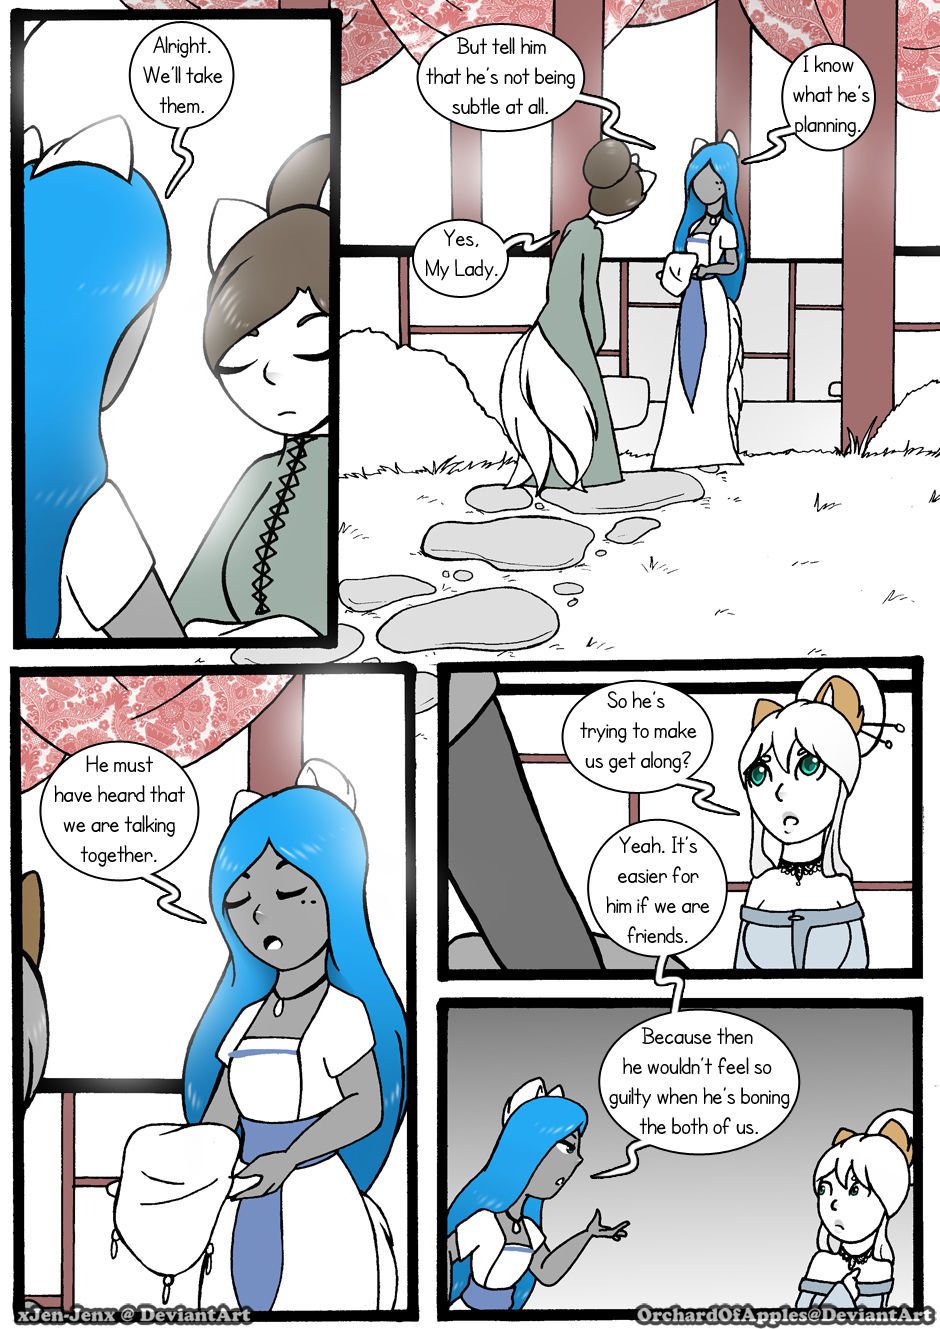 [Jeny-jen94] Between Kings and Queens [Ongoing] 219